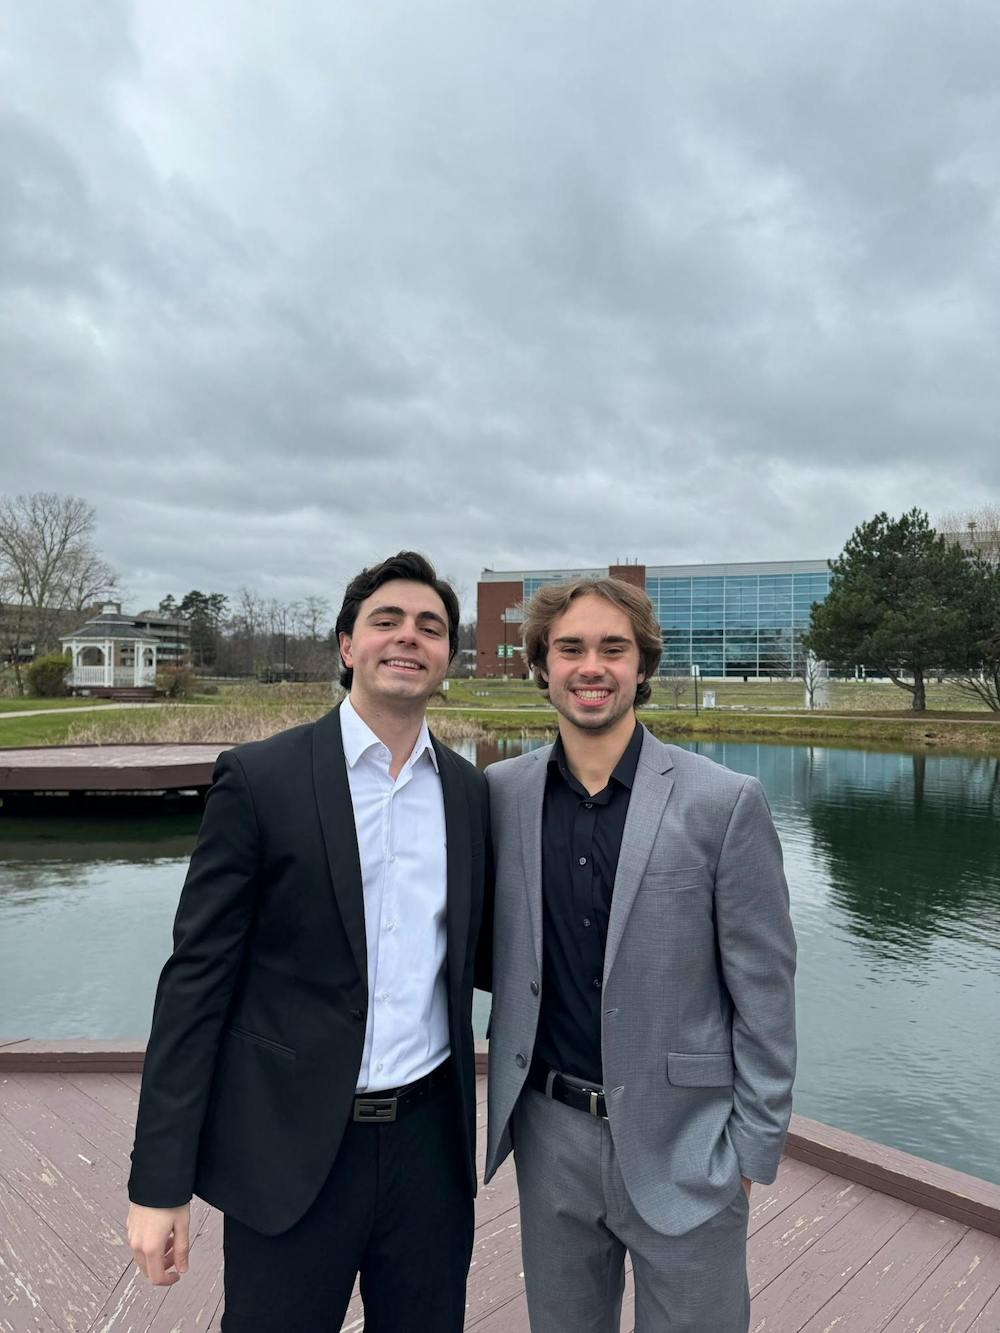 Hamzah Dajani and Jack Booth stand in front of the EMU University Pond in suits.